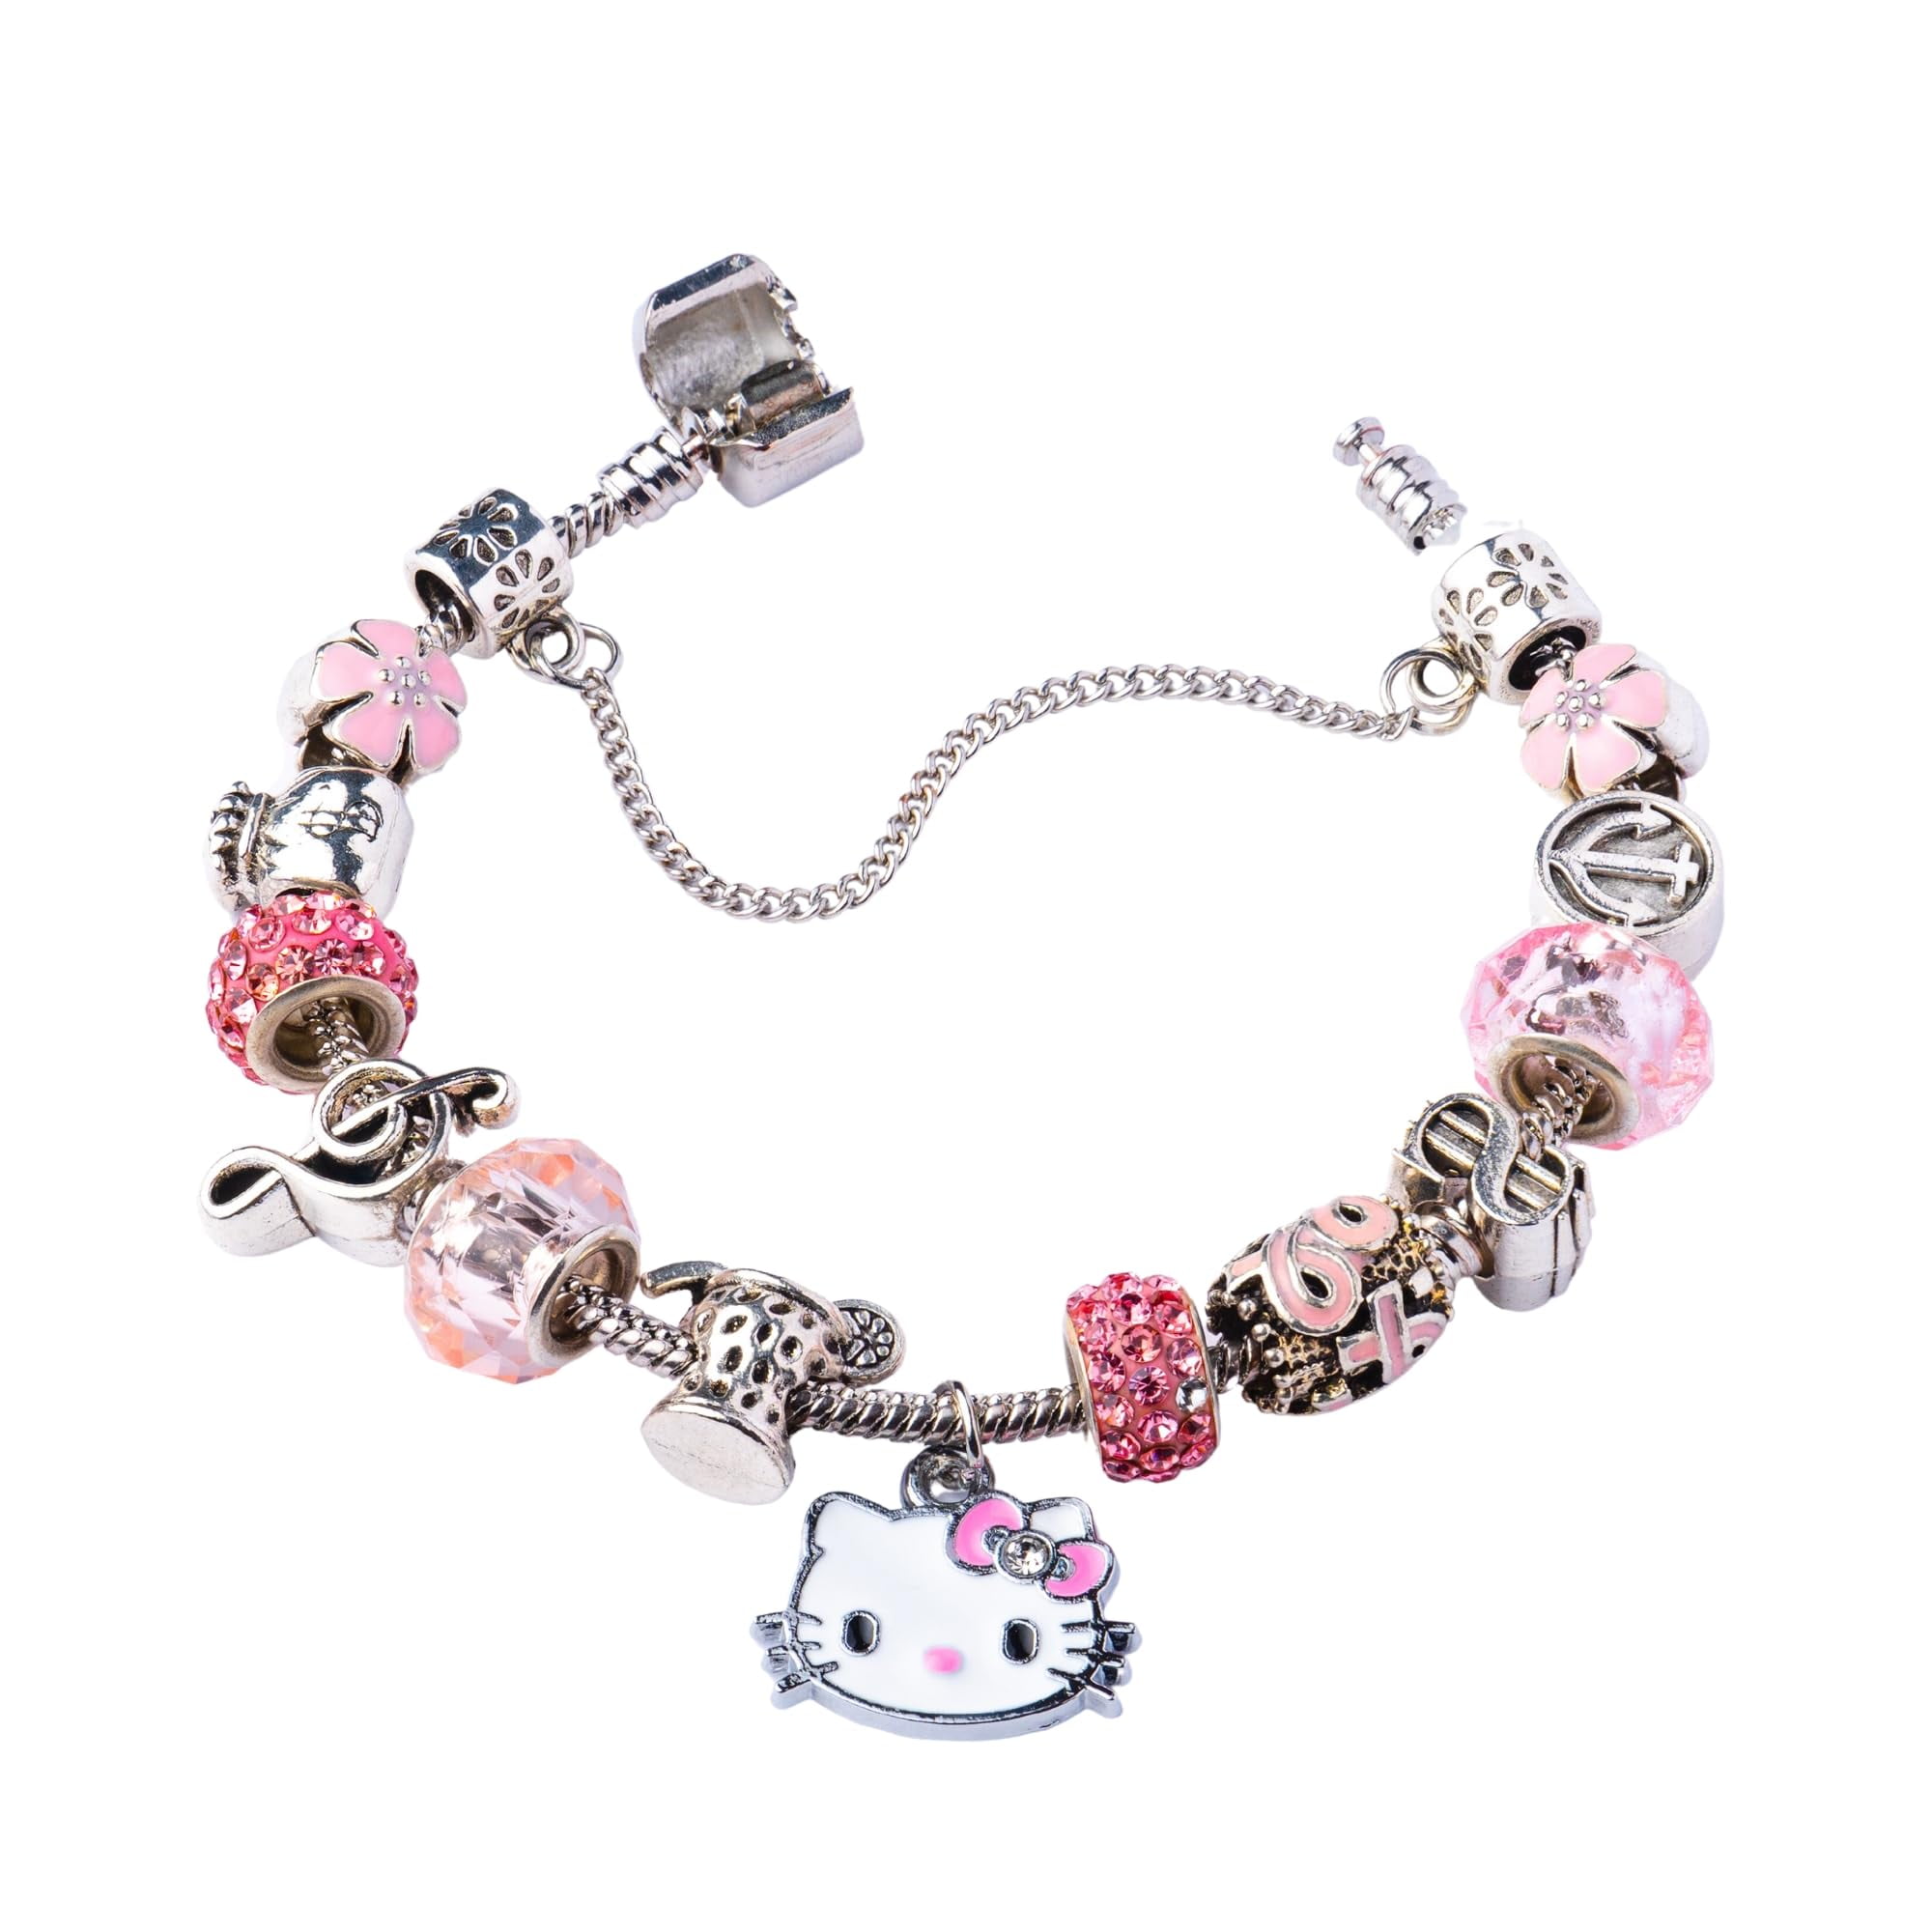 X 10 PACKS Hello Kitty Fashion Charms & Bracelets by Topps £4.99